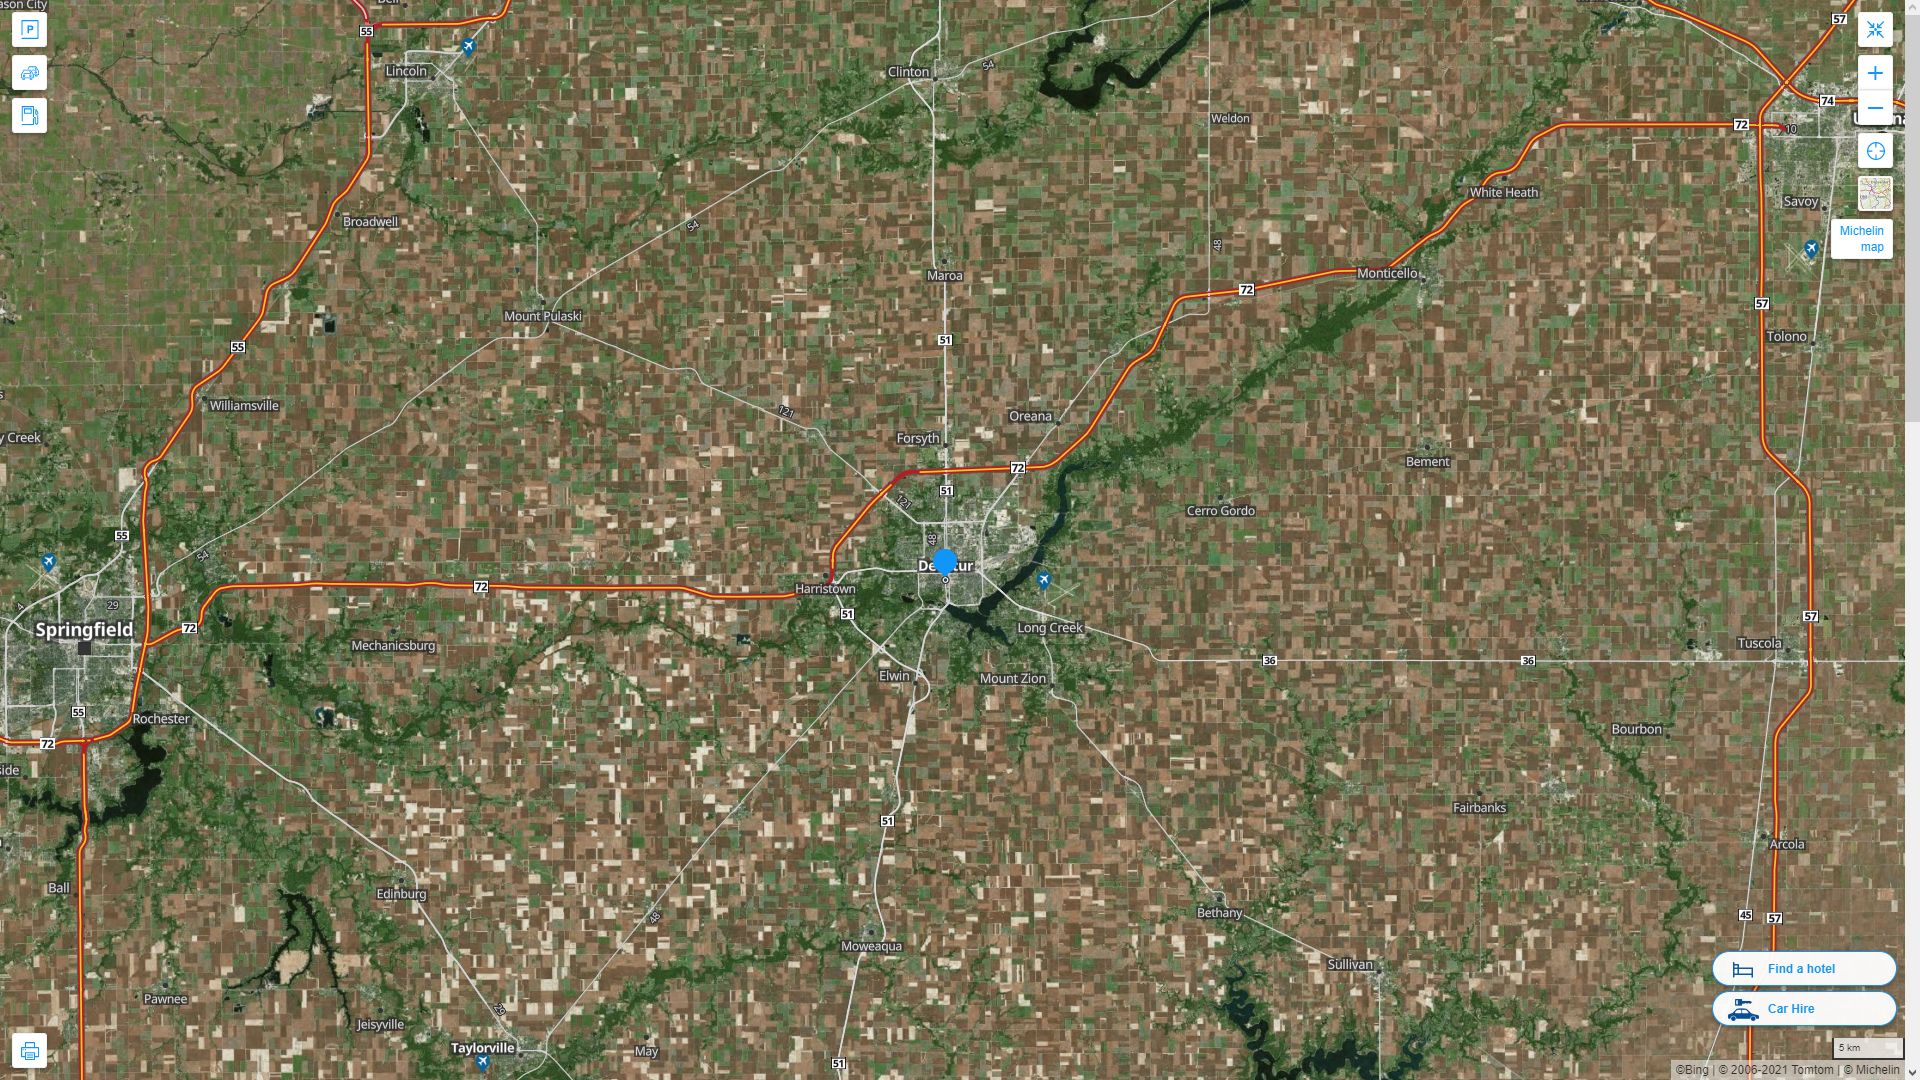 Decatur illinois Highway and Road Map with Satellite View